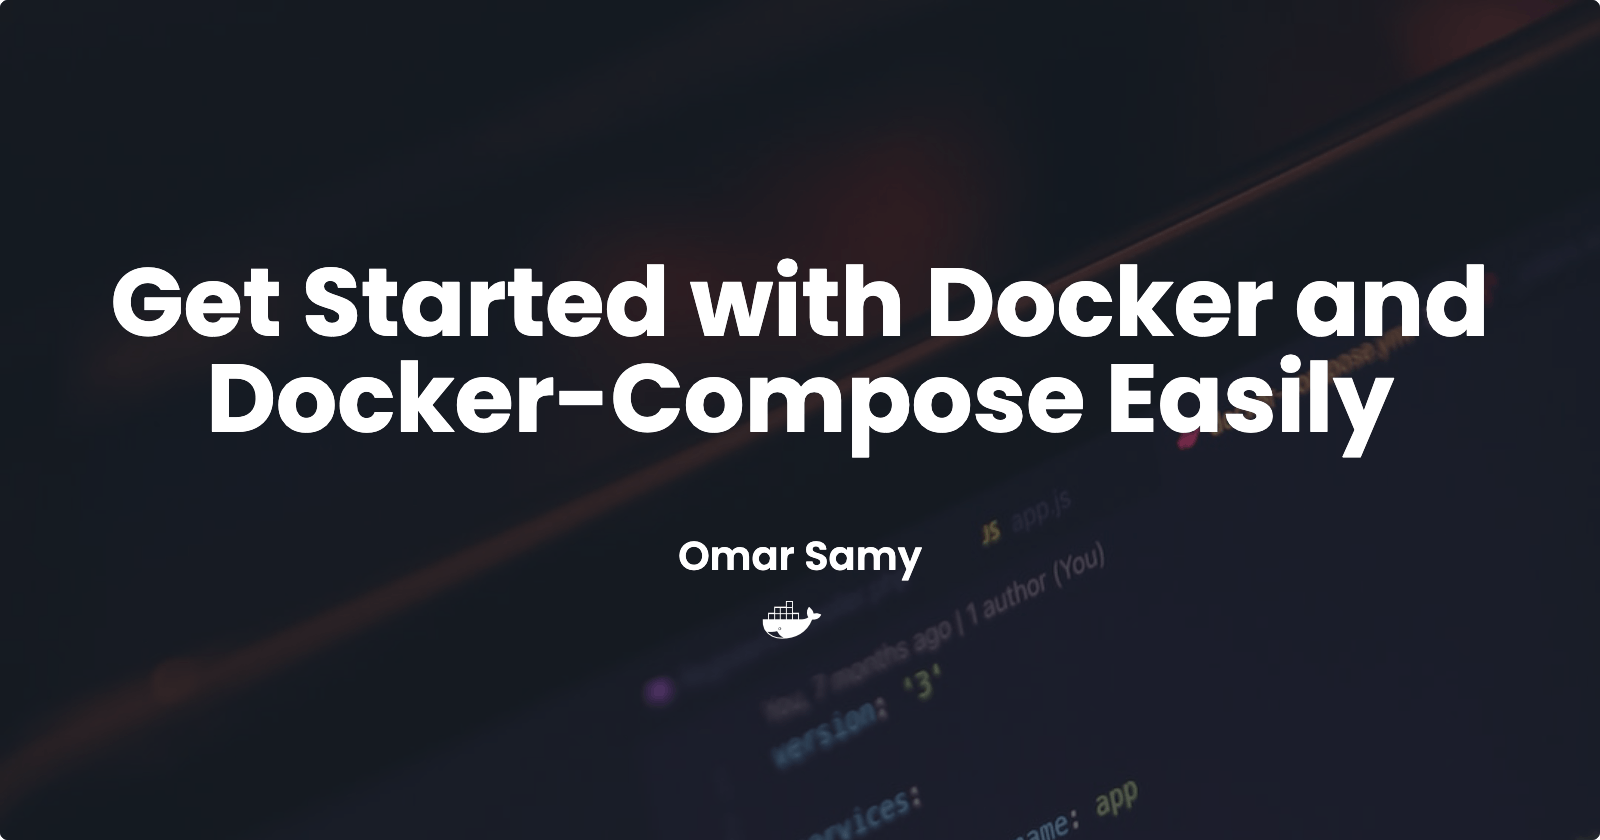 Get Started with Docker and Docker-Compose Easily